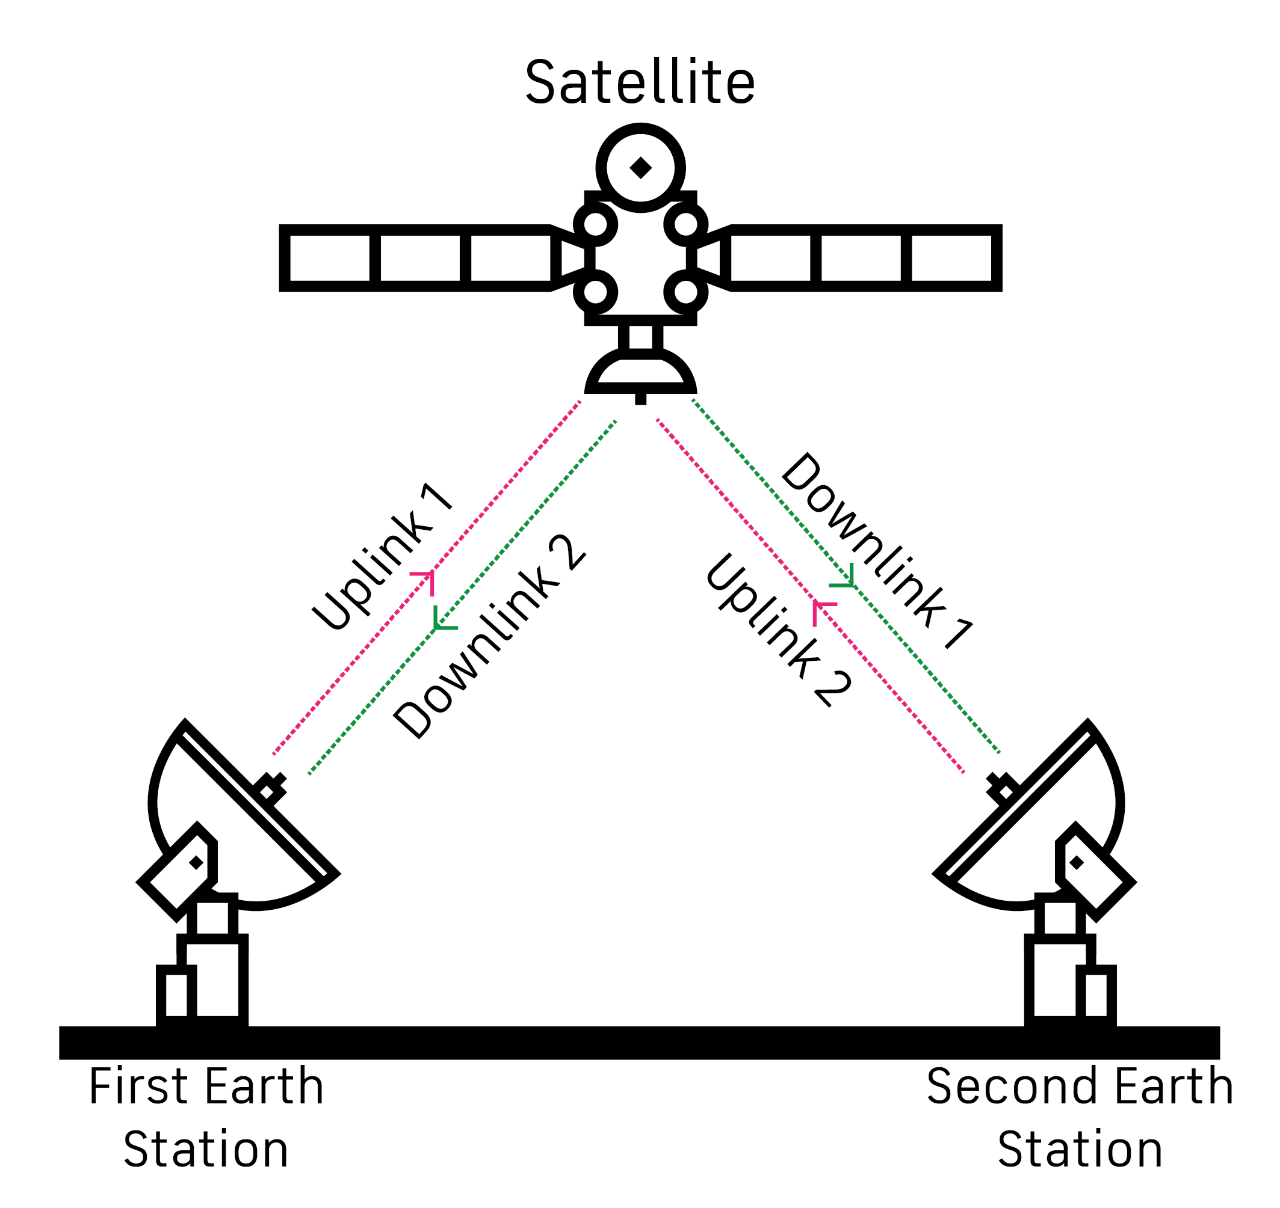 Two way communication satellite network displaying information relayed between the same ground stations via the same satellite.